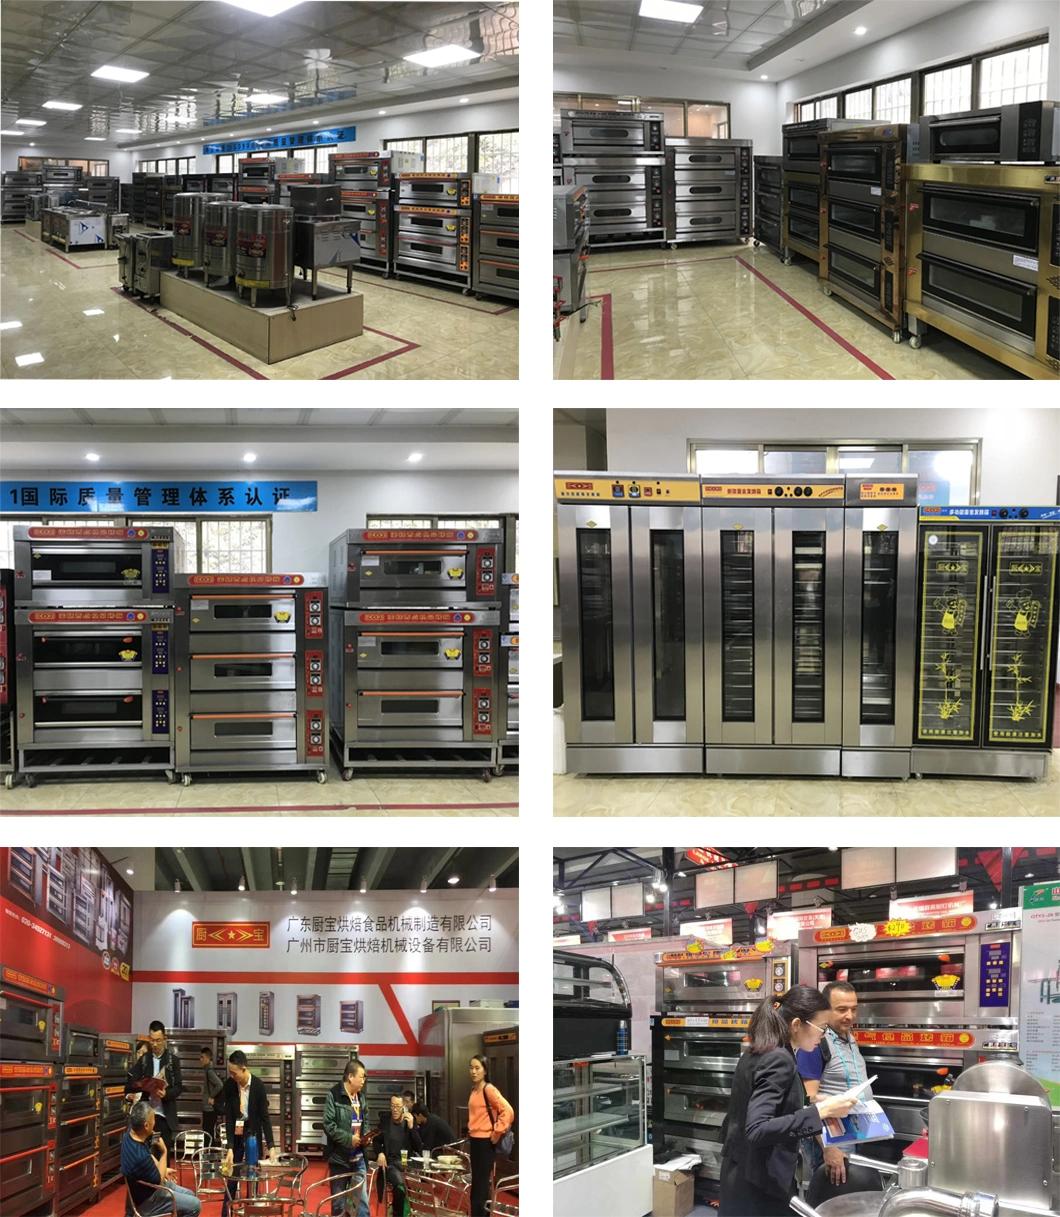 1 Deck 3 Tray Electric Oven for Gd Chubao Commercial Kitchen Baking Equipment Bakery Machine Food Equipment